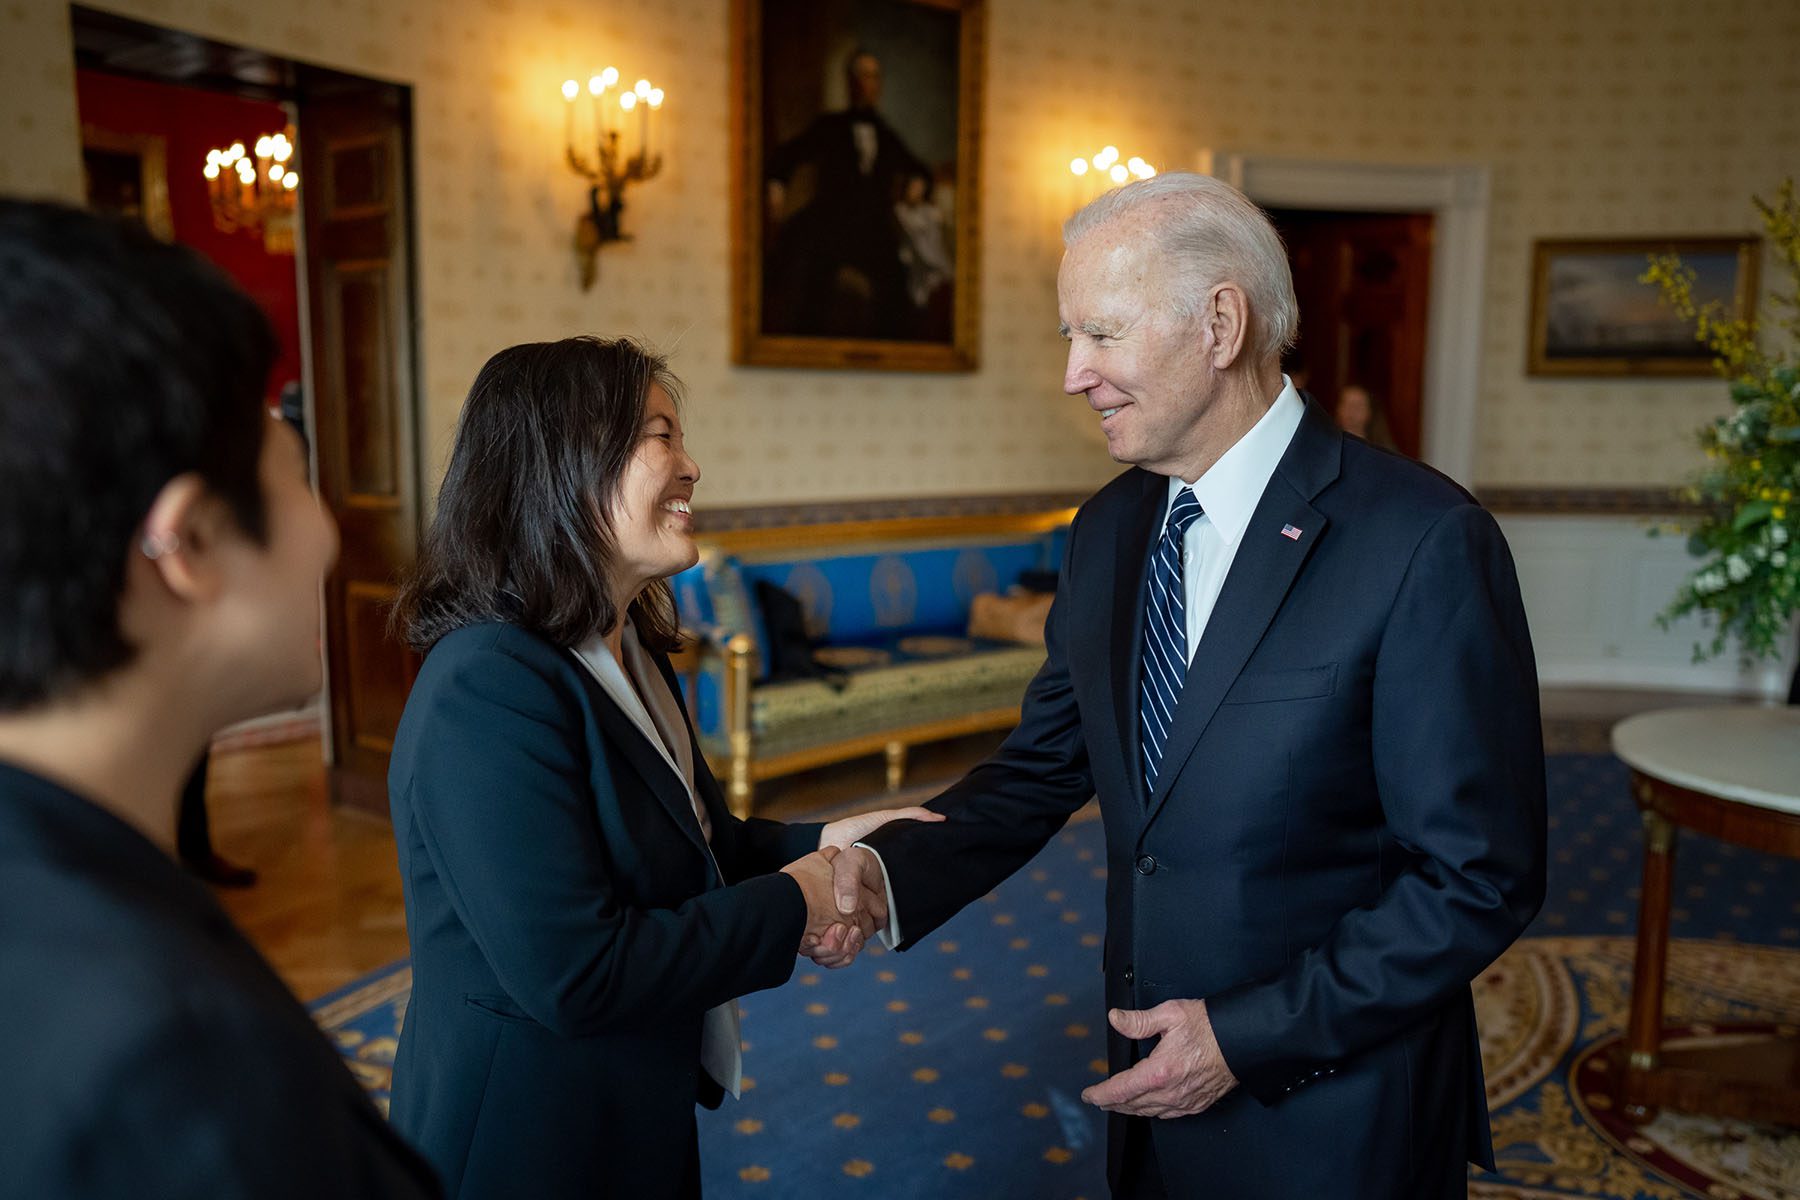 President Joe Biden greets Labor Secretary nominee Julie Su in the Blue Room of the White House on March 1, 2023.